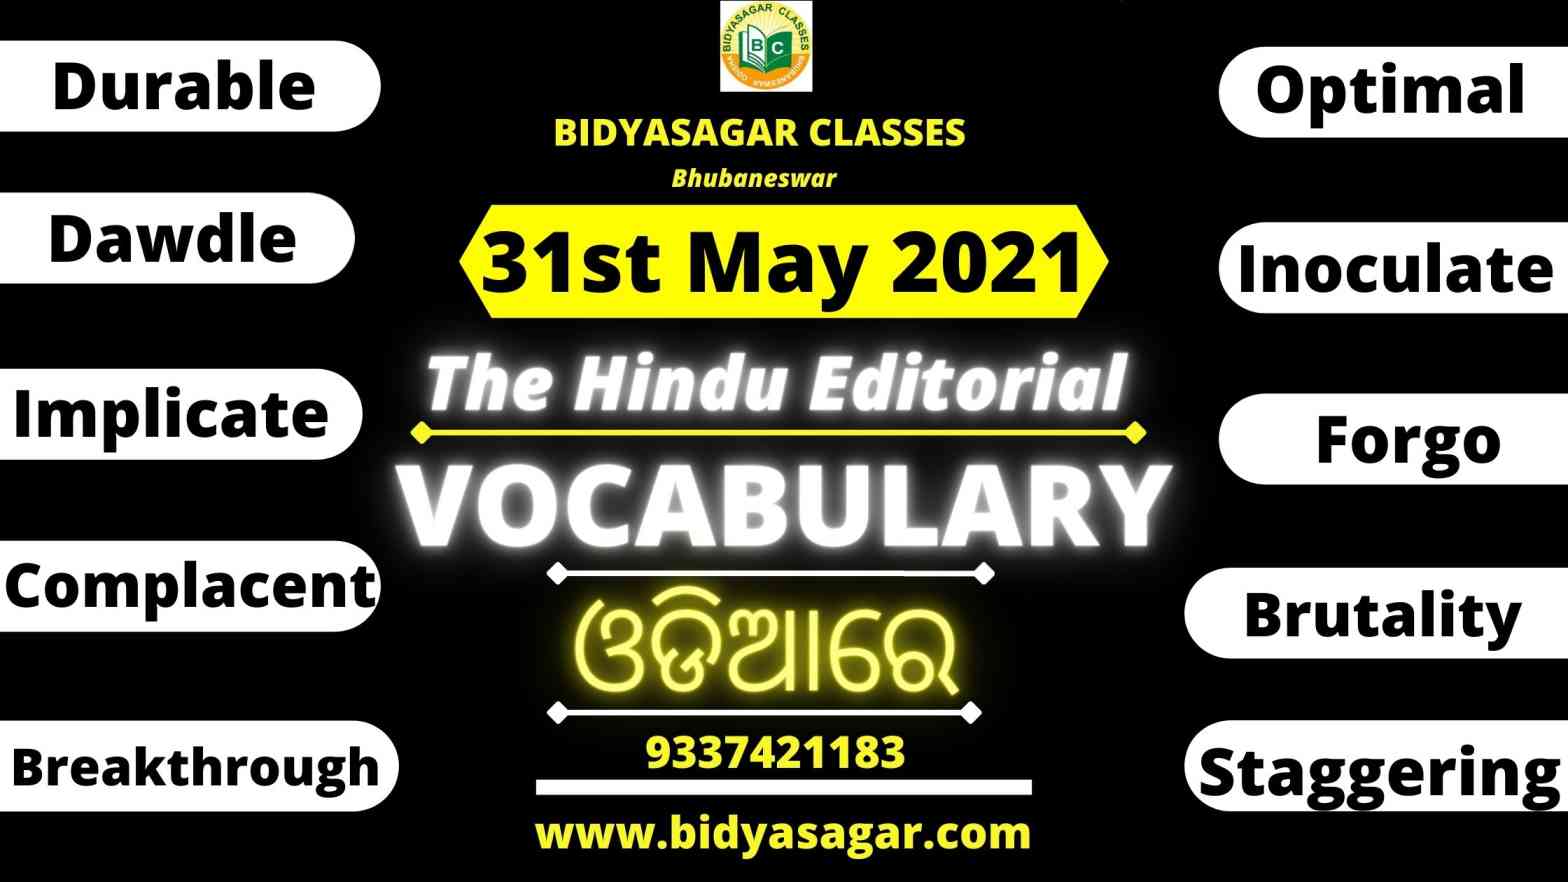 The Hindu Editorial Vocabulary of 31st May 2021